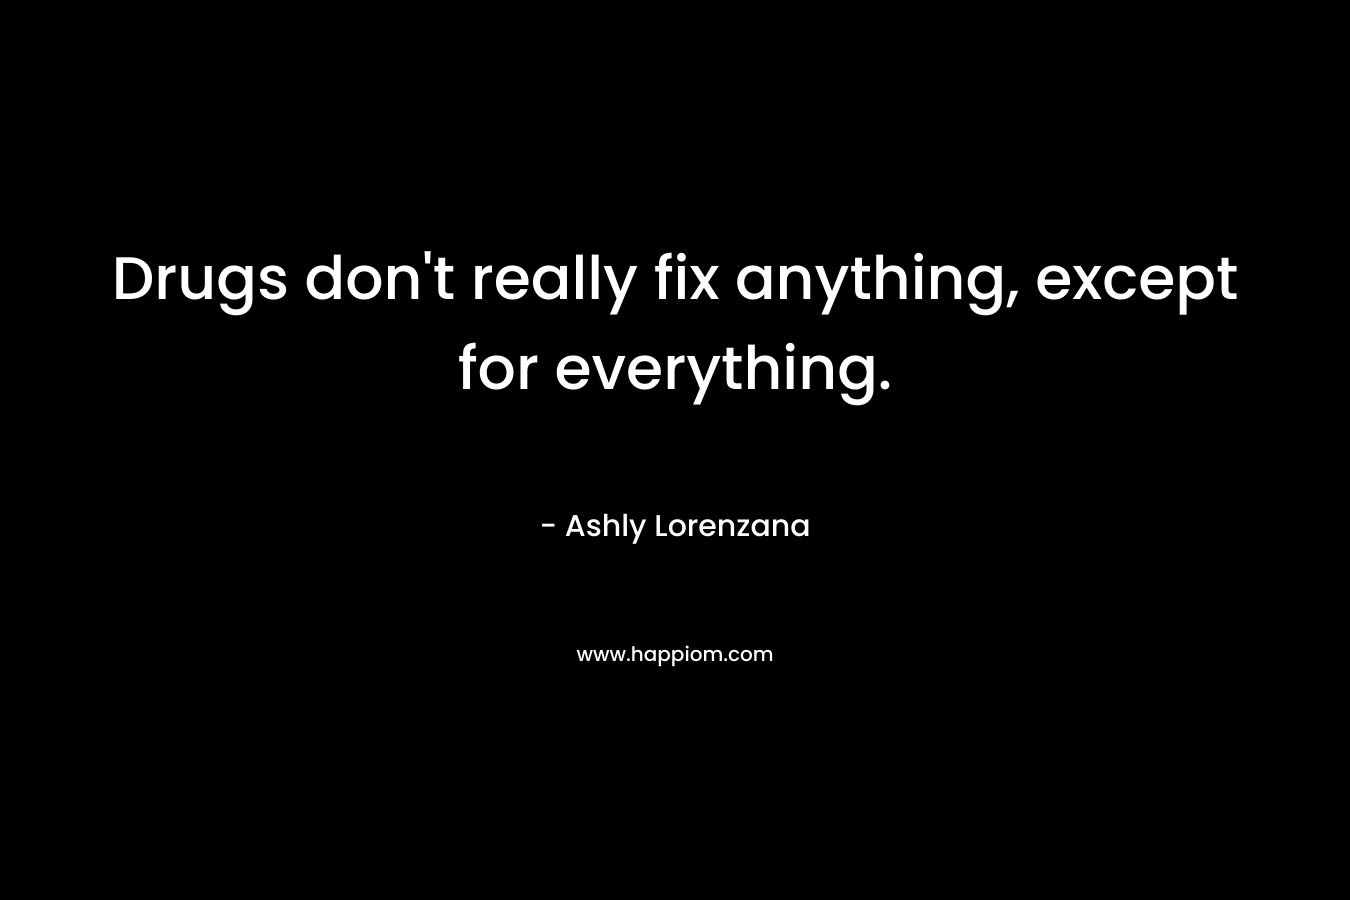 Drugs don’t really fix anything, except for everything. – Ashly Lorenzana